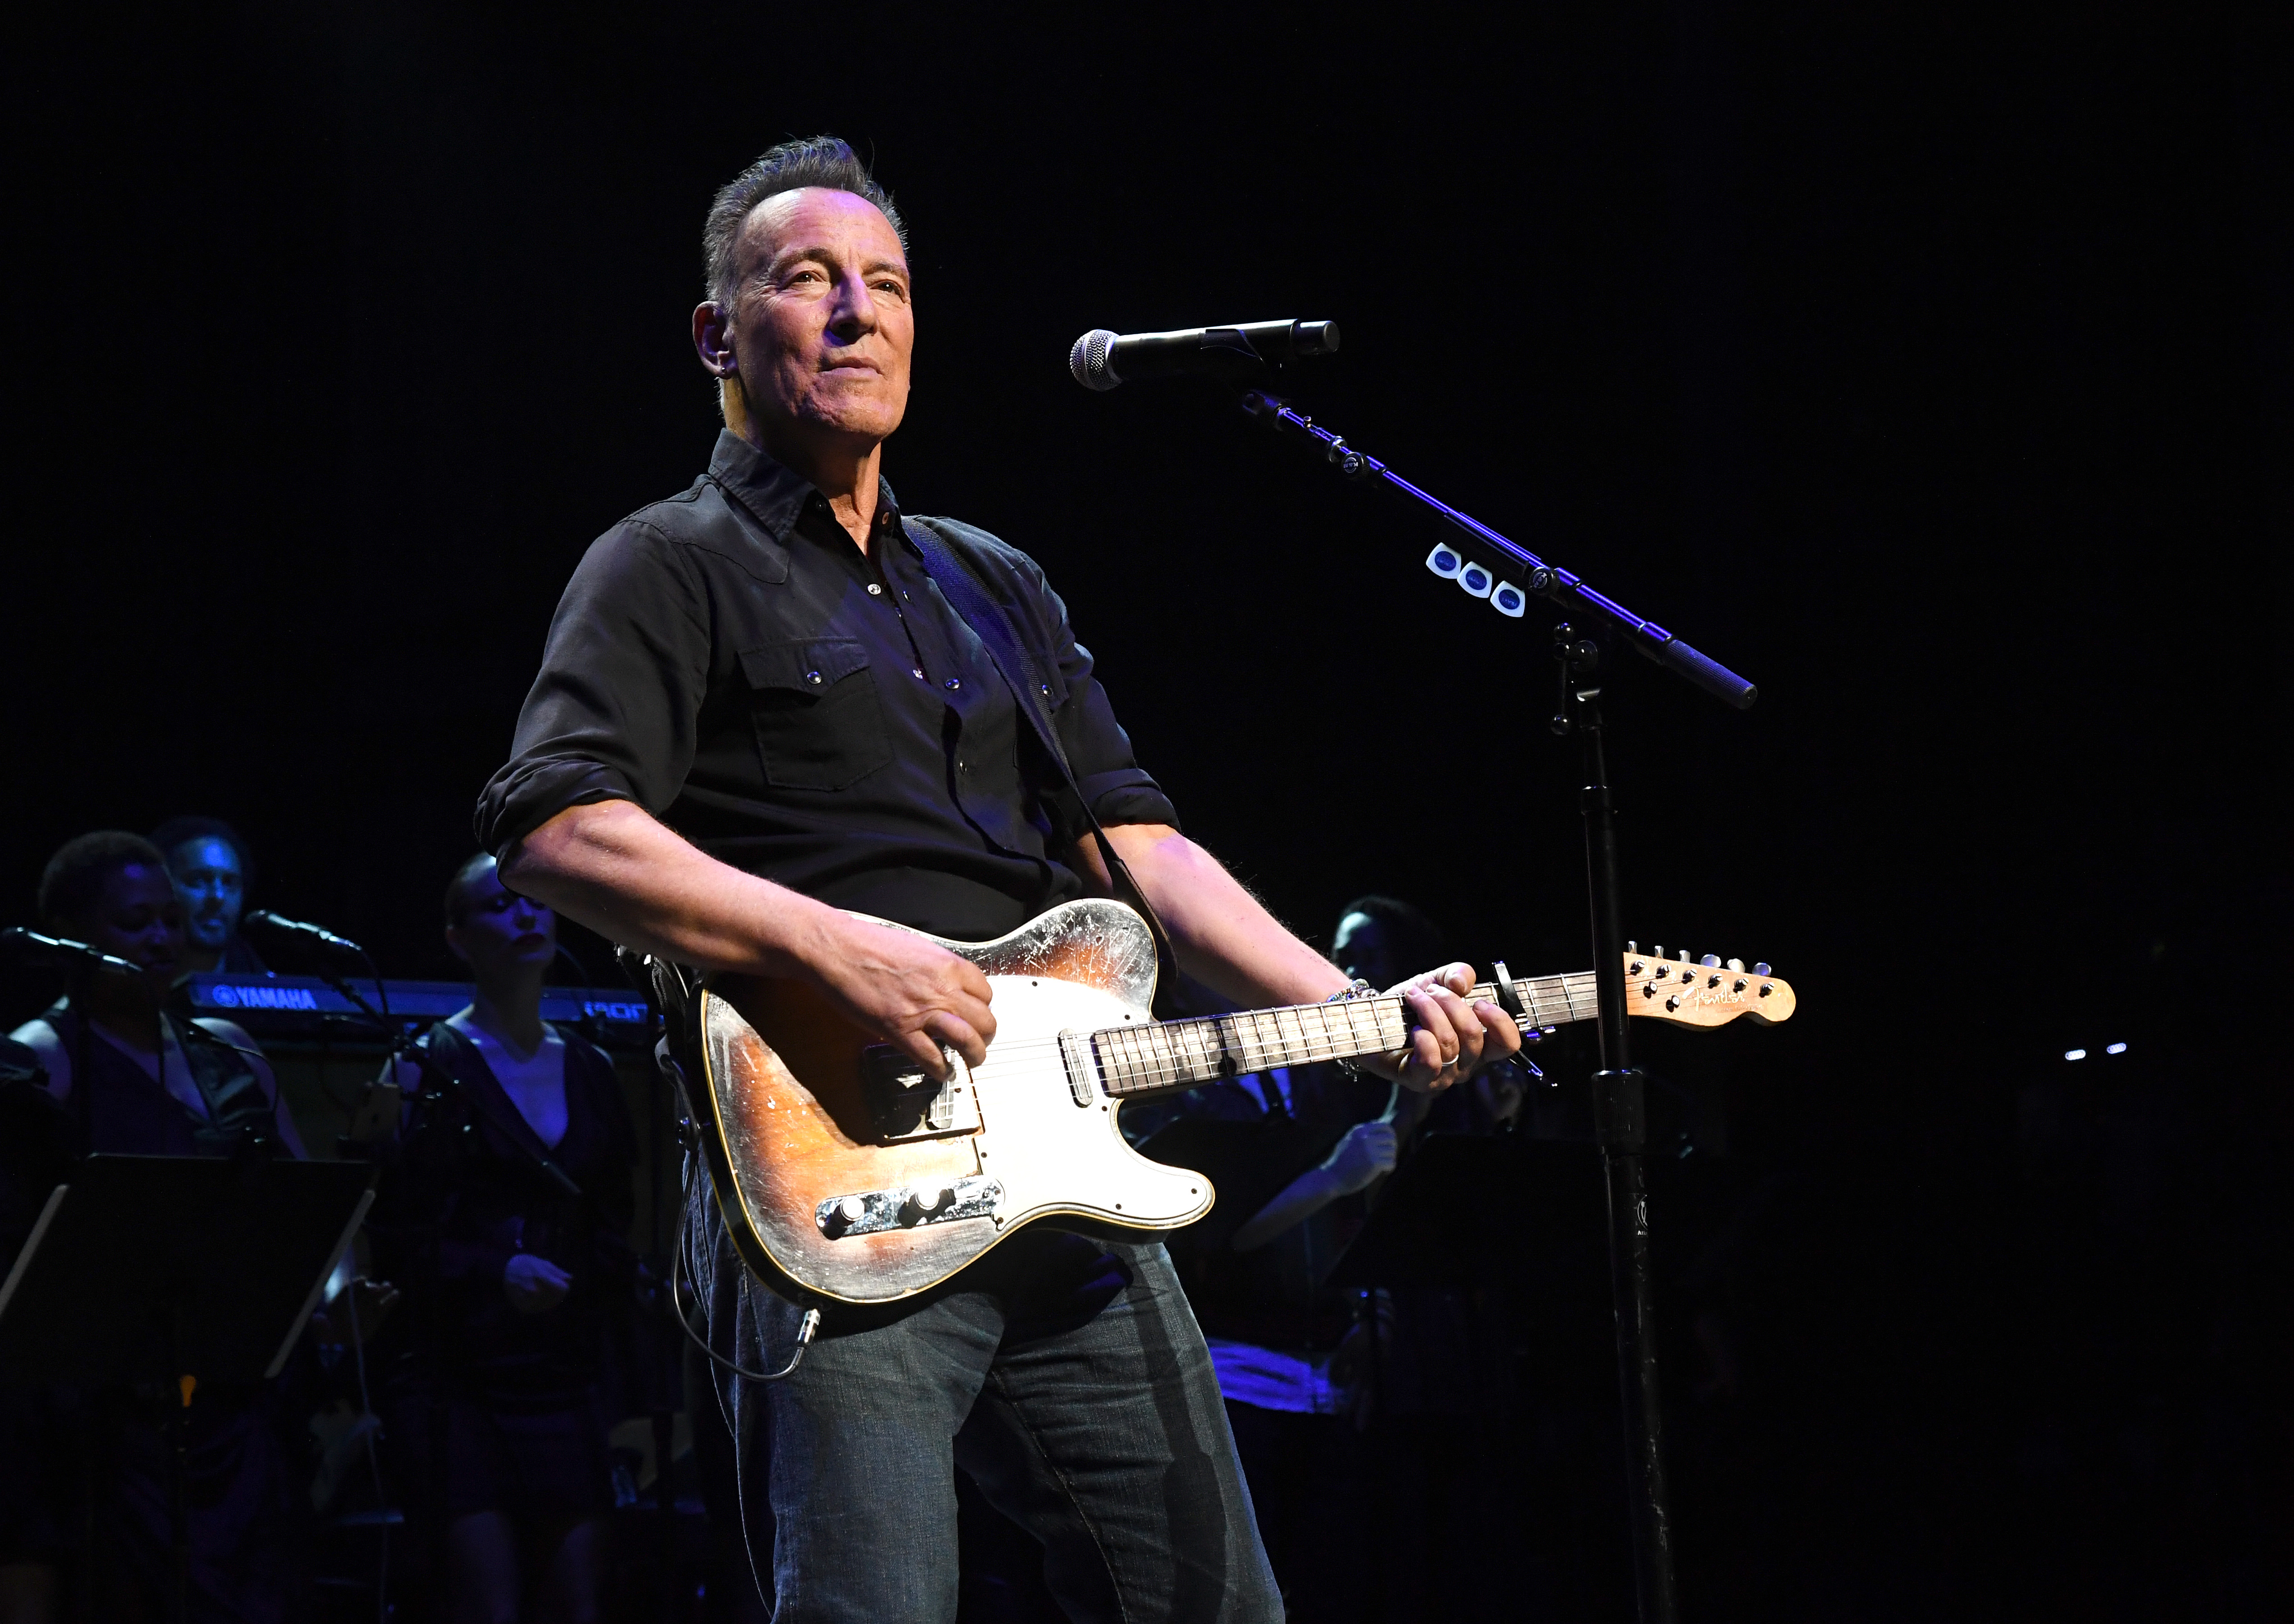 Bruce Springsteen playing guitar